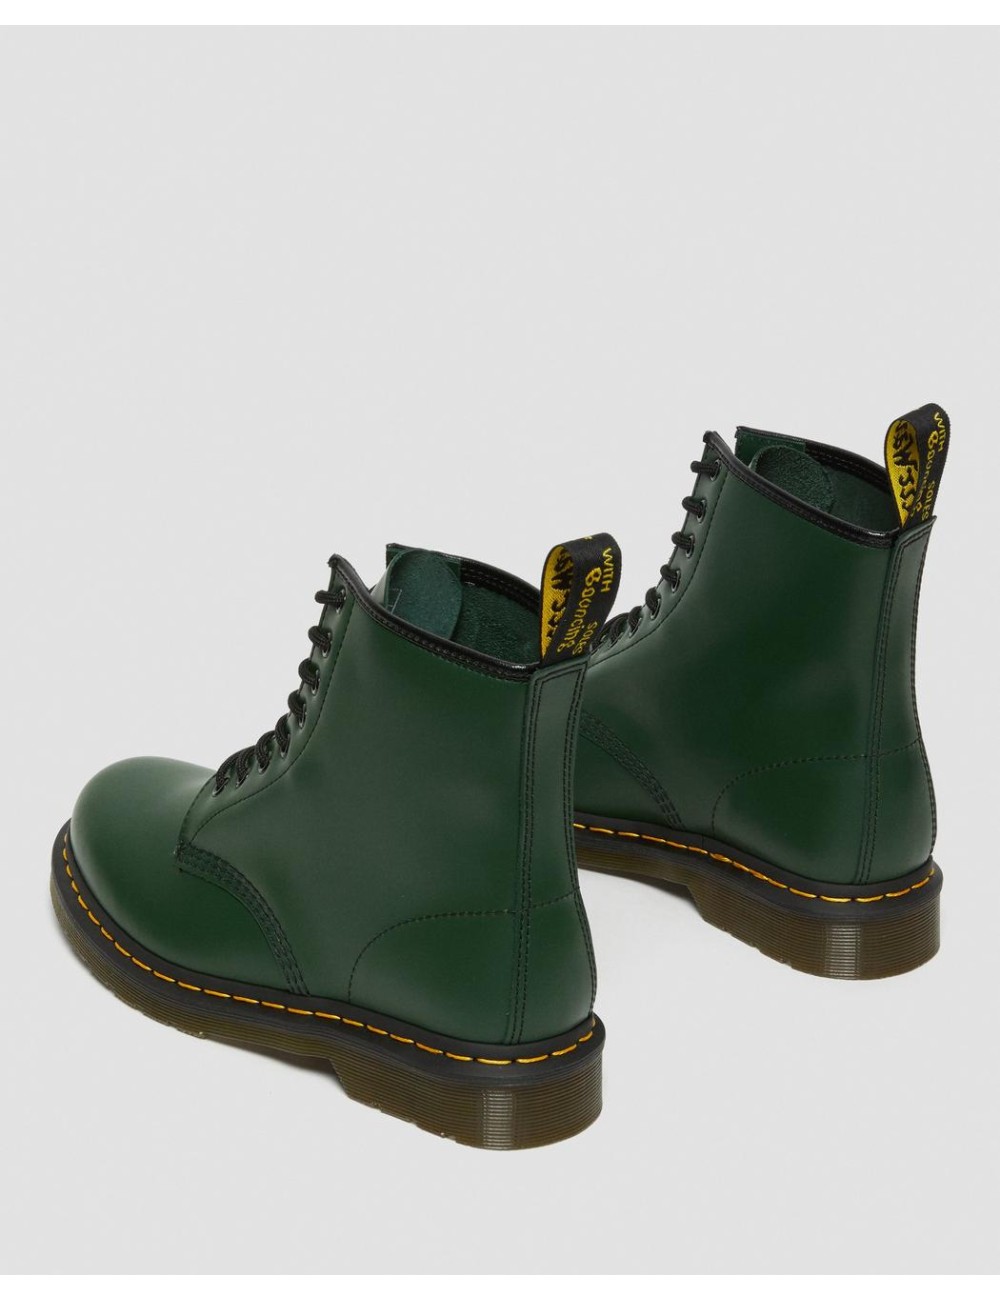 DR MARTENS 1460 SMOOTH GREEN BOOTS UNISEX